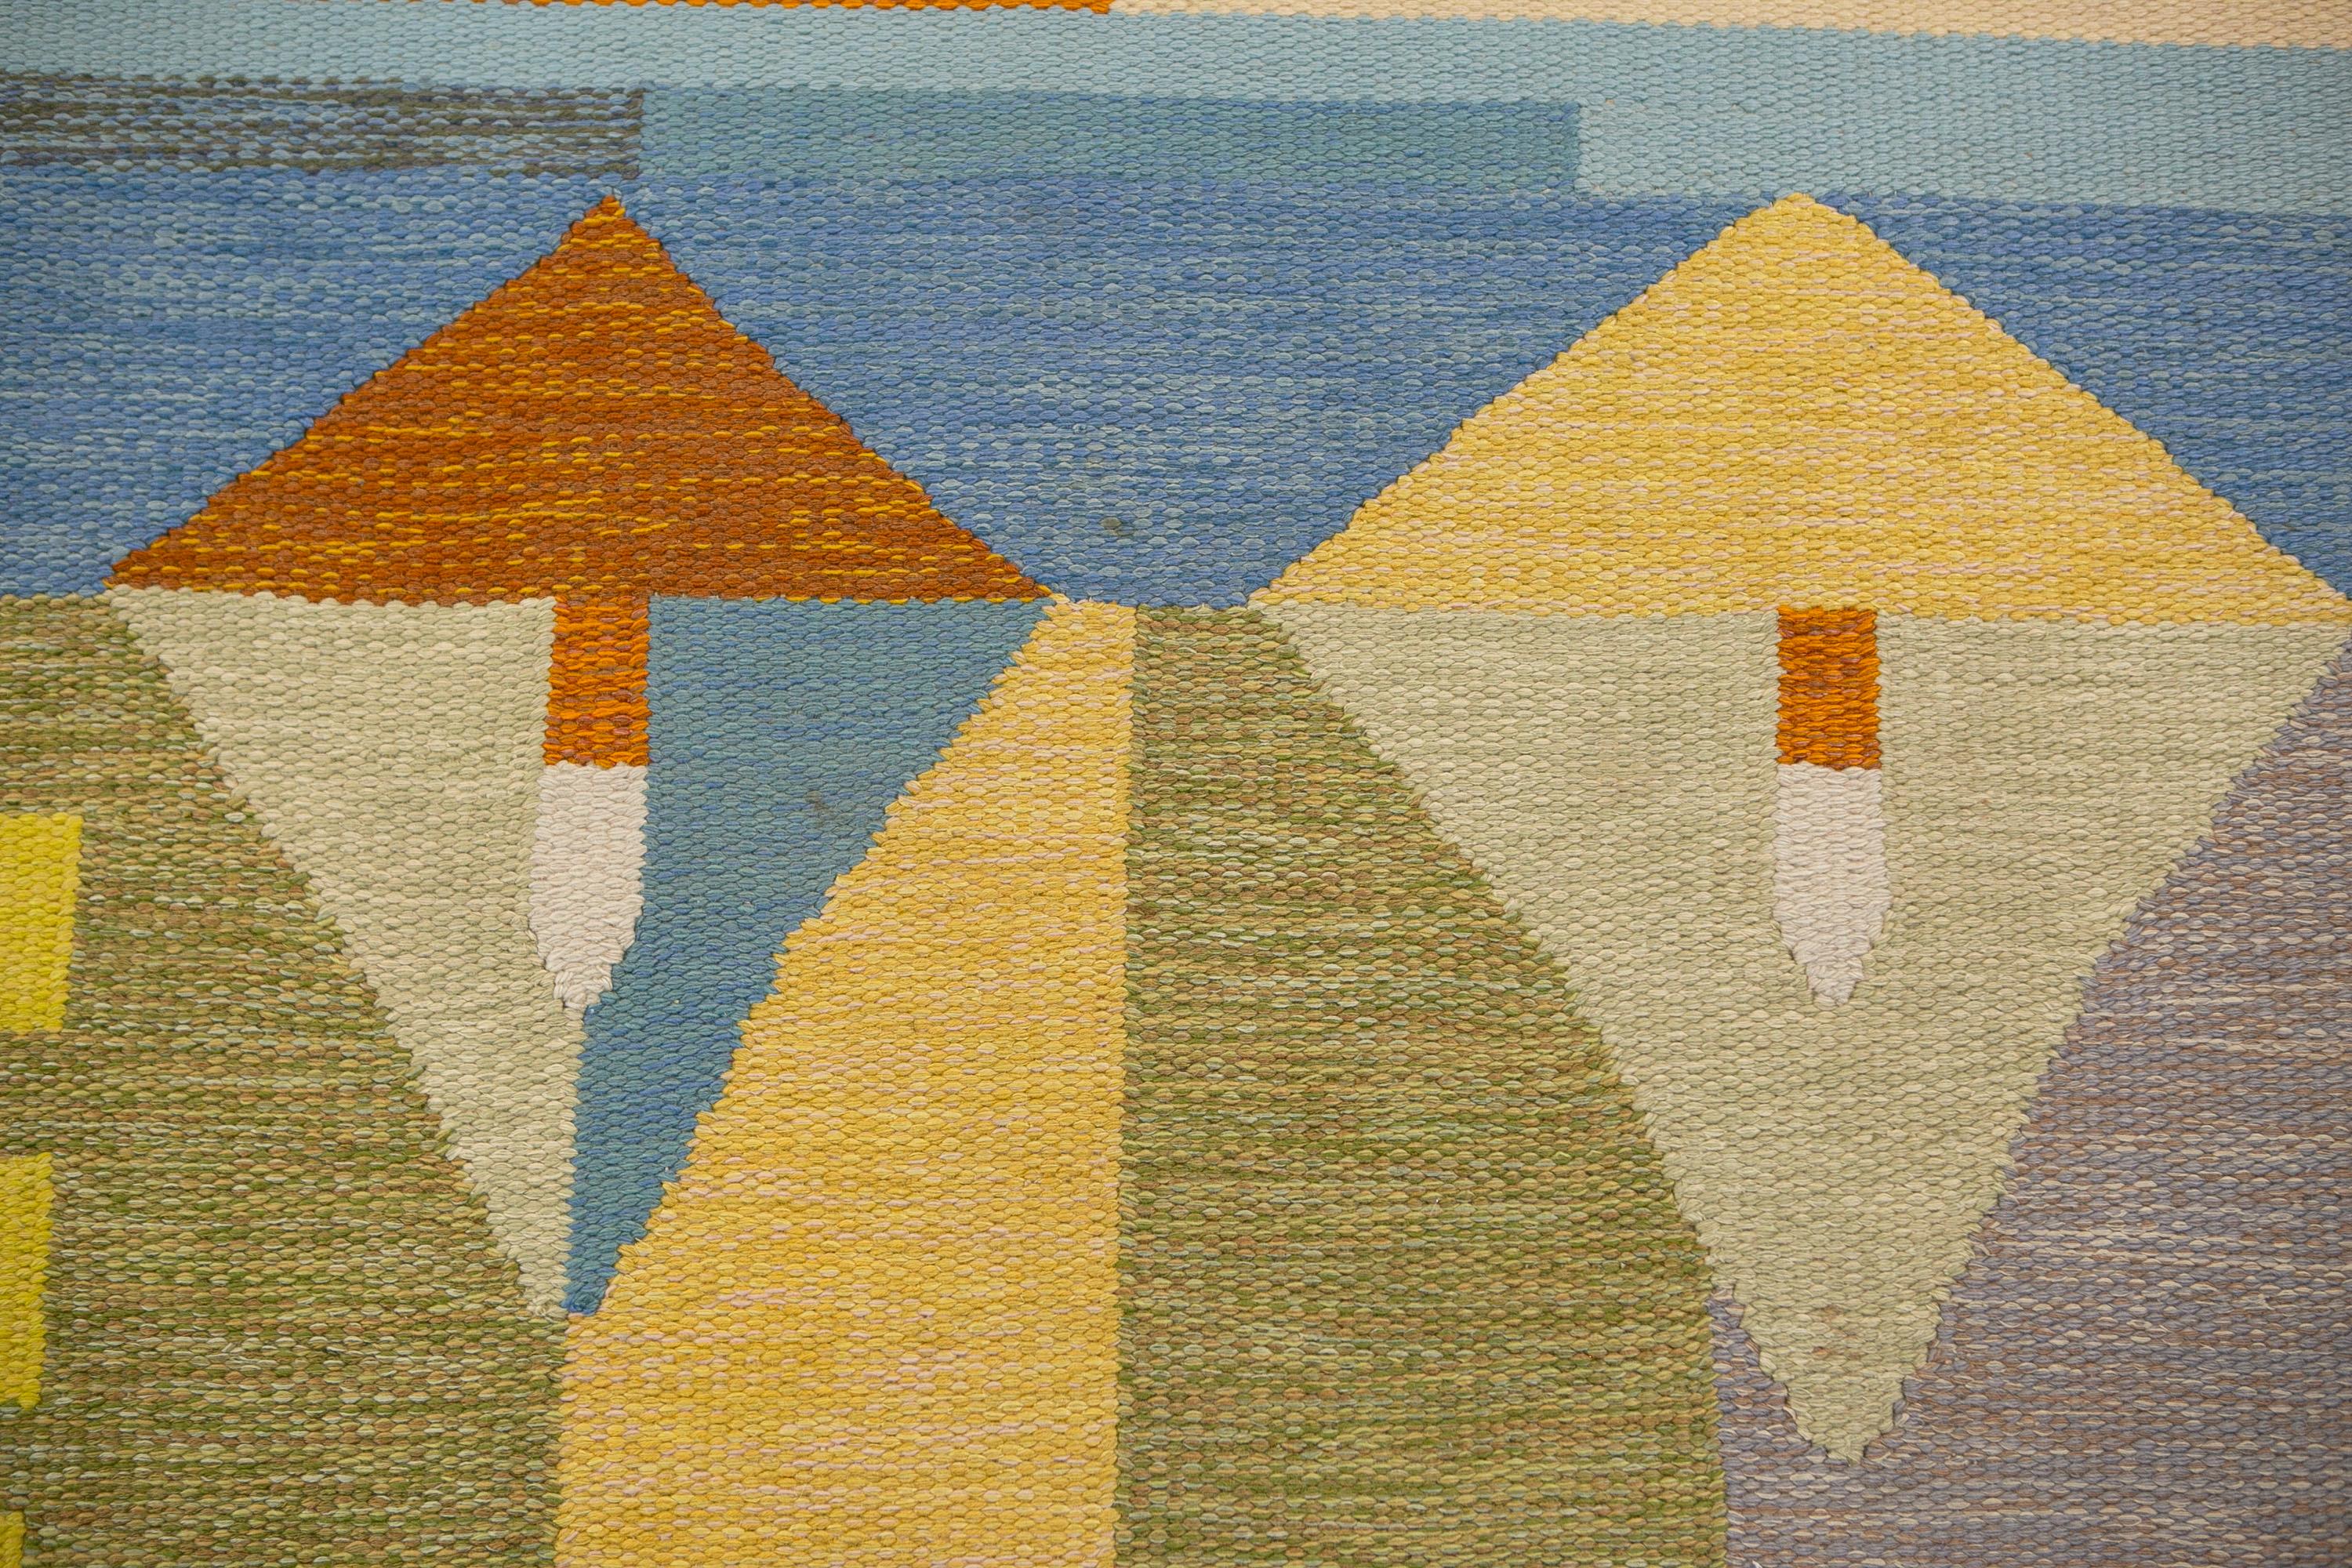 Hand-Woven Agda Österberg Large Flat-Weave Rug No. 210 Signed 